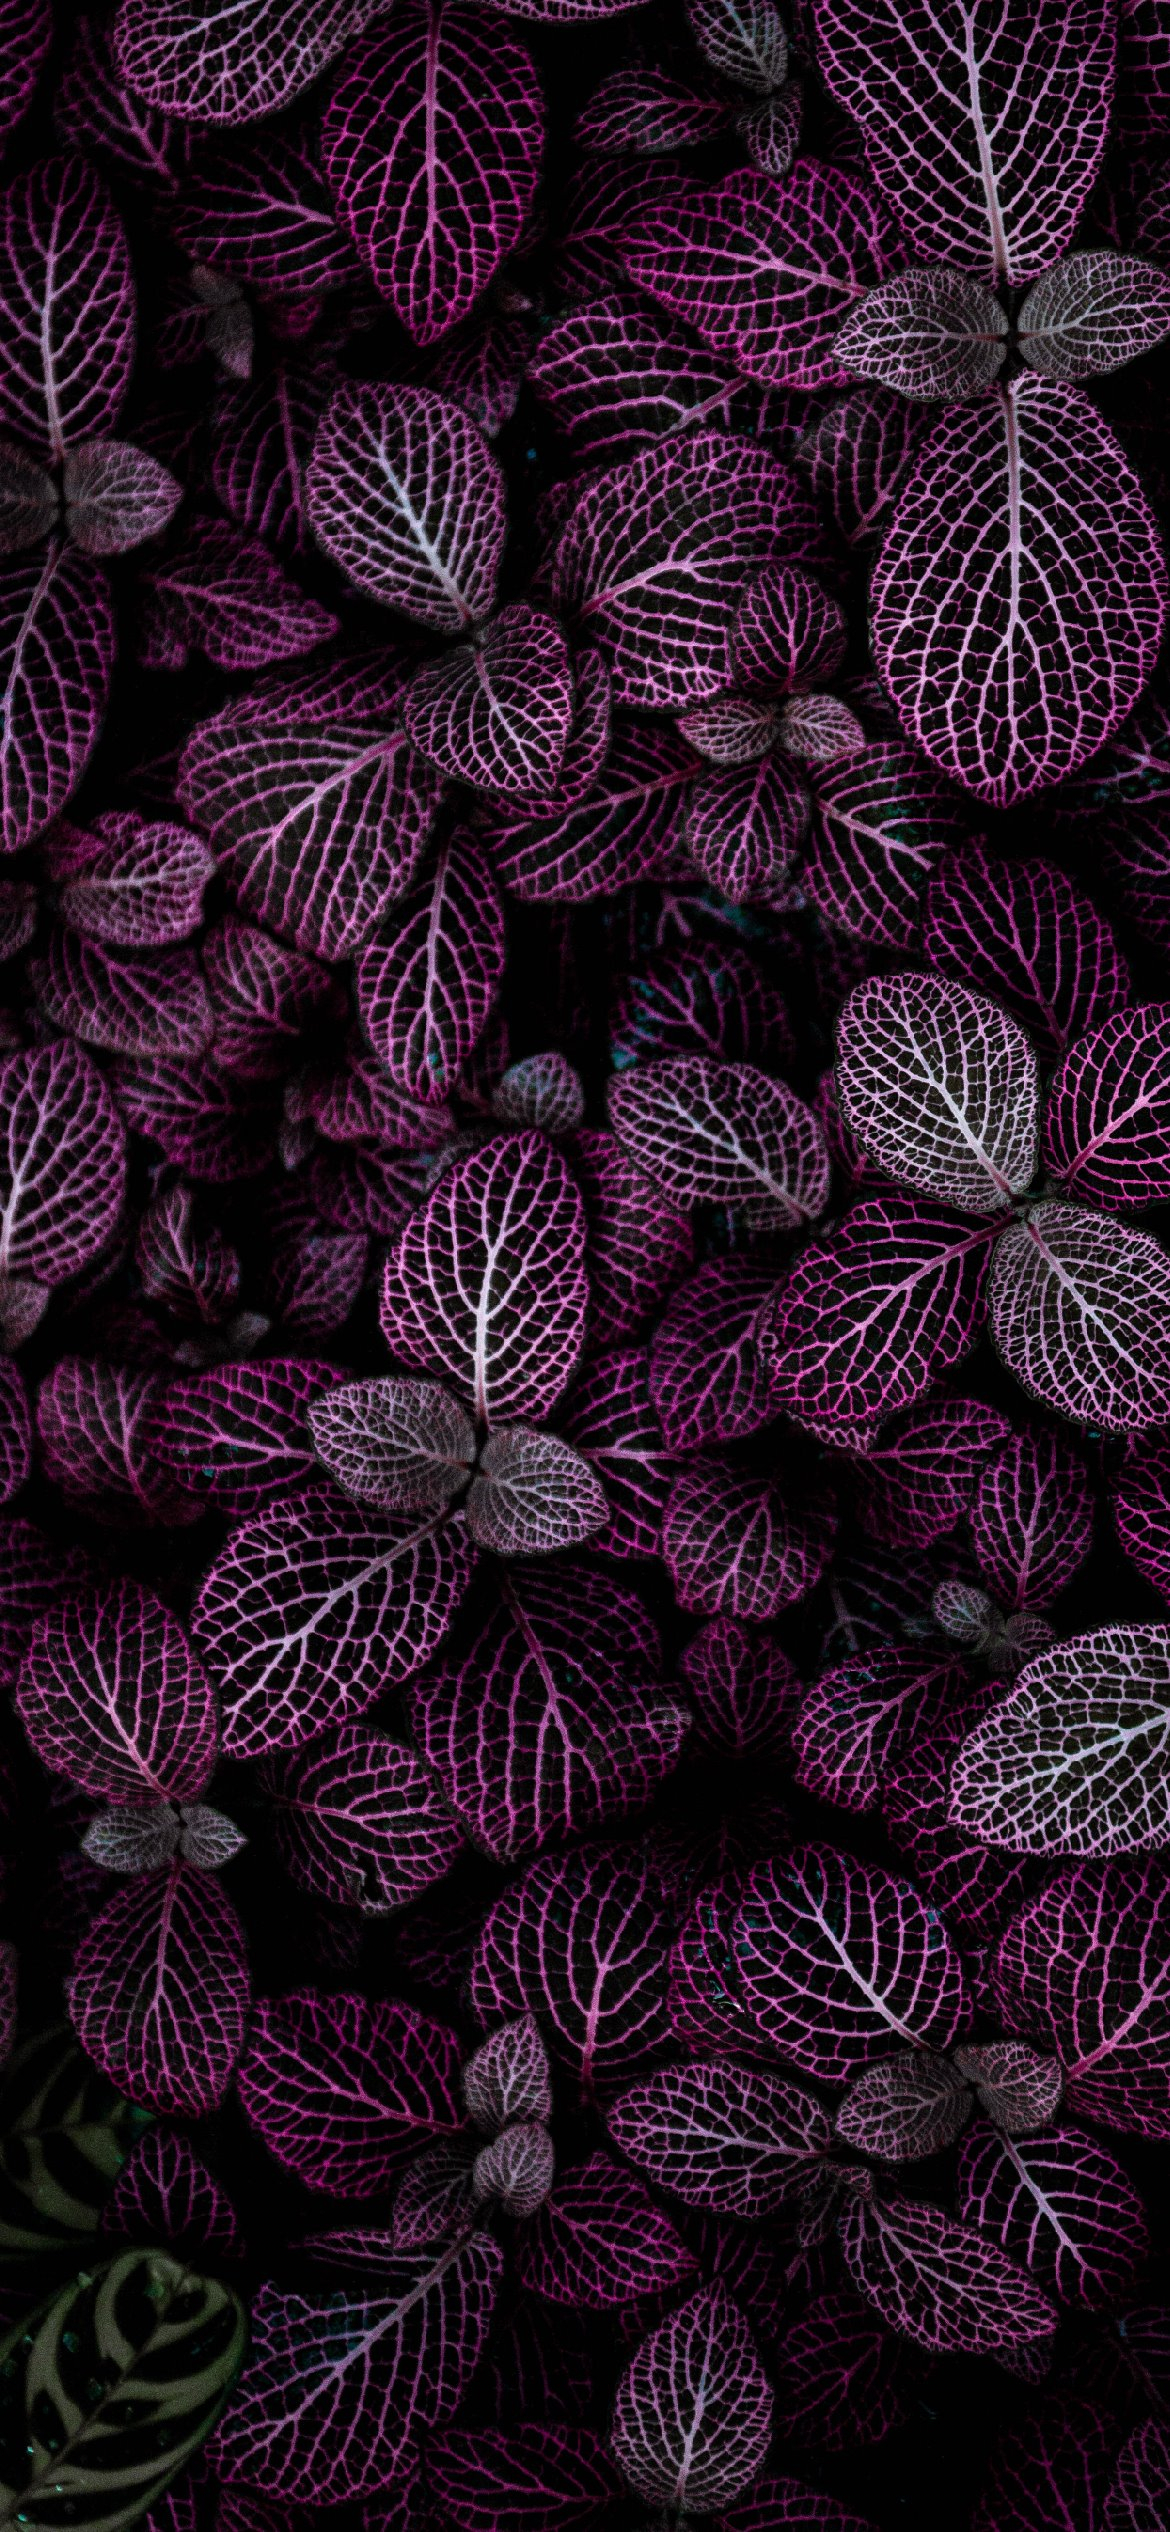 1170x2532 32 Free Purple Aesthetic Wallpaper Backgrounds Perfect For Your iPhone